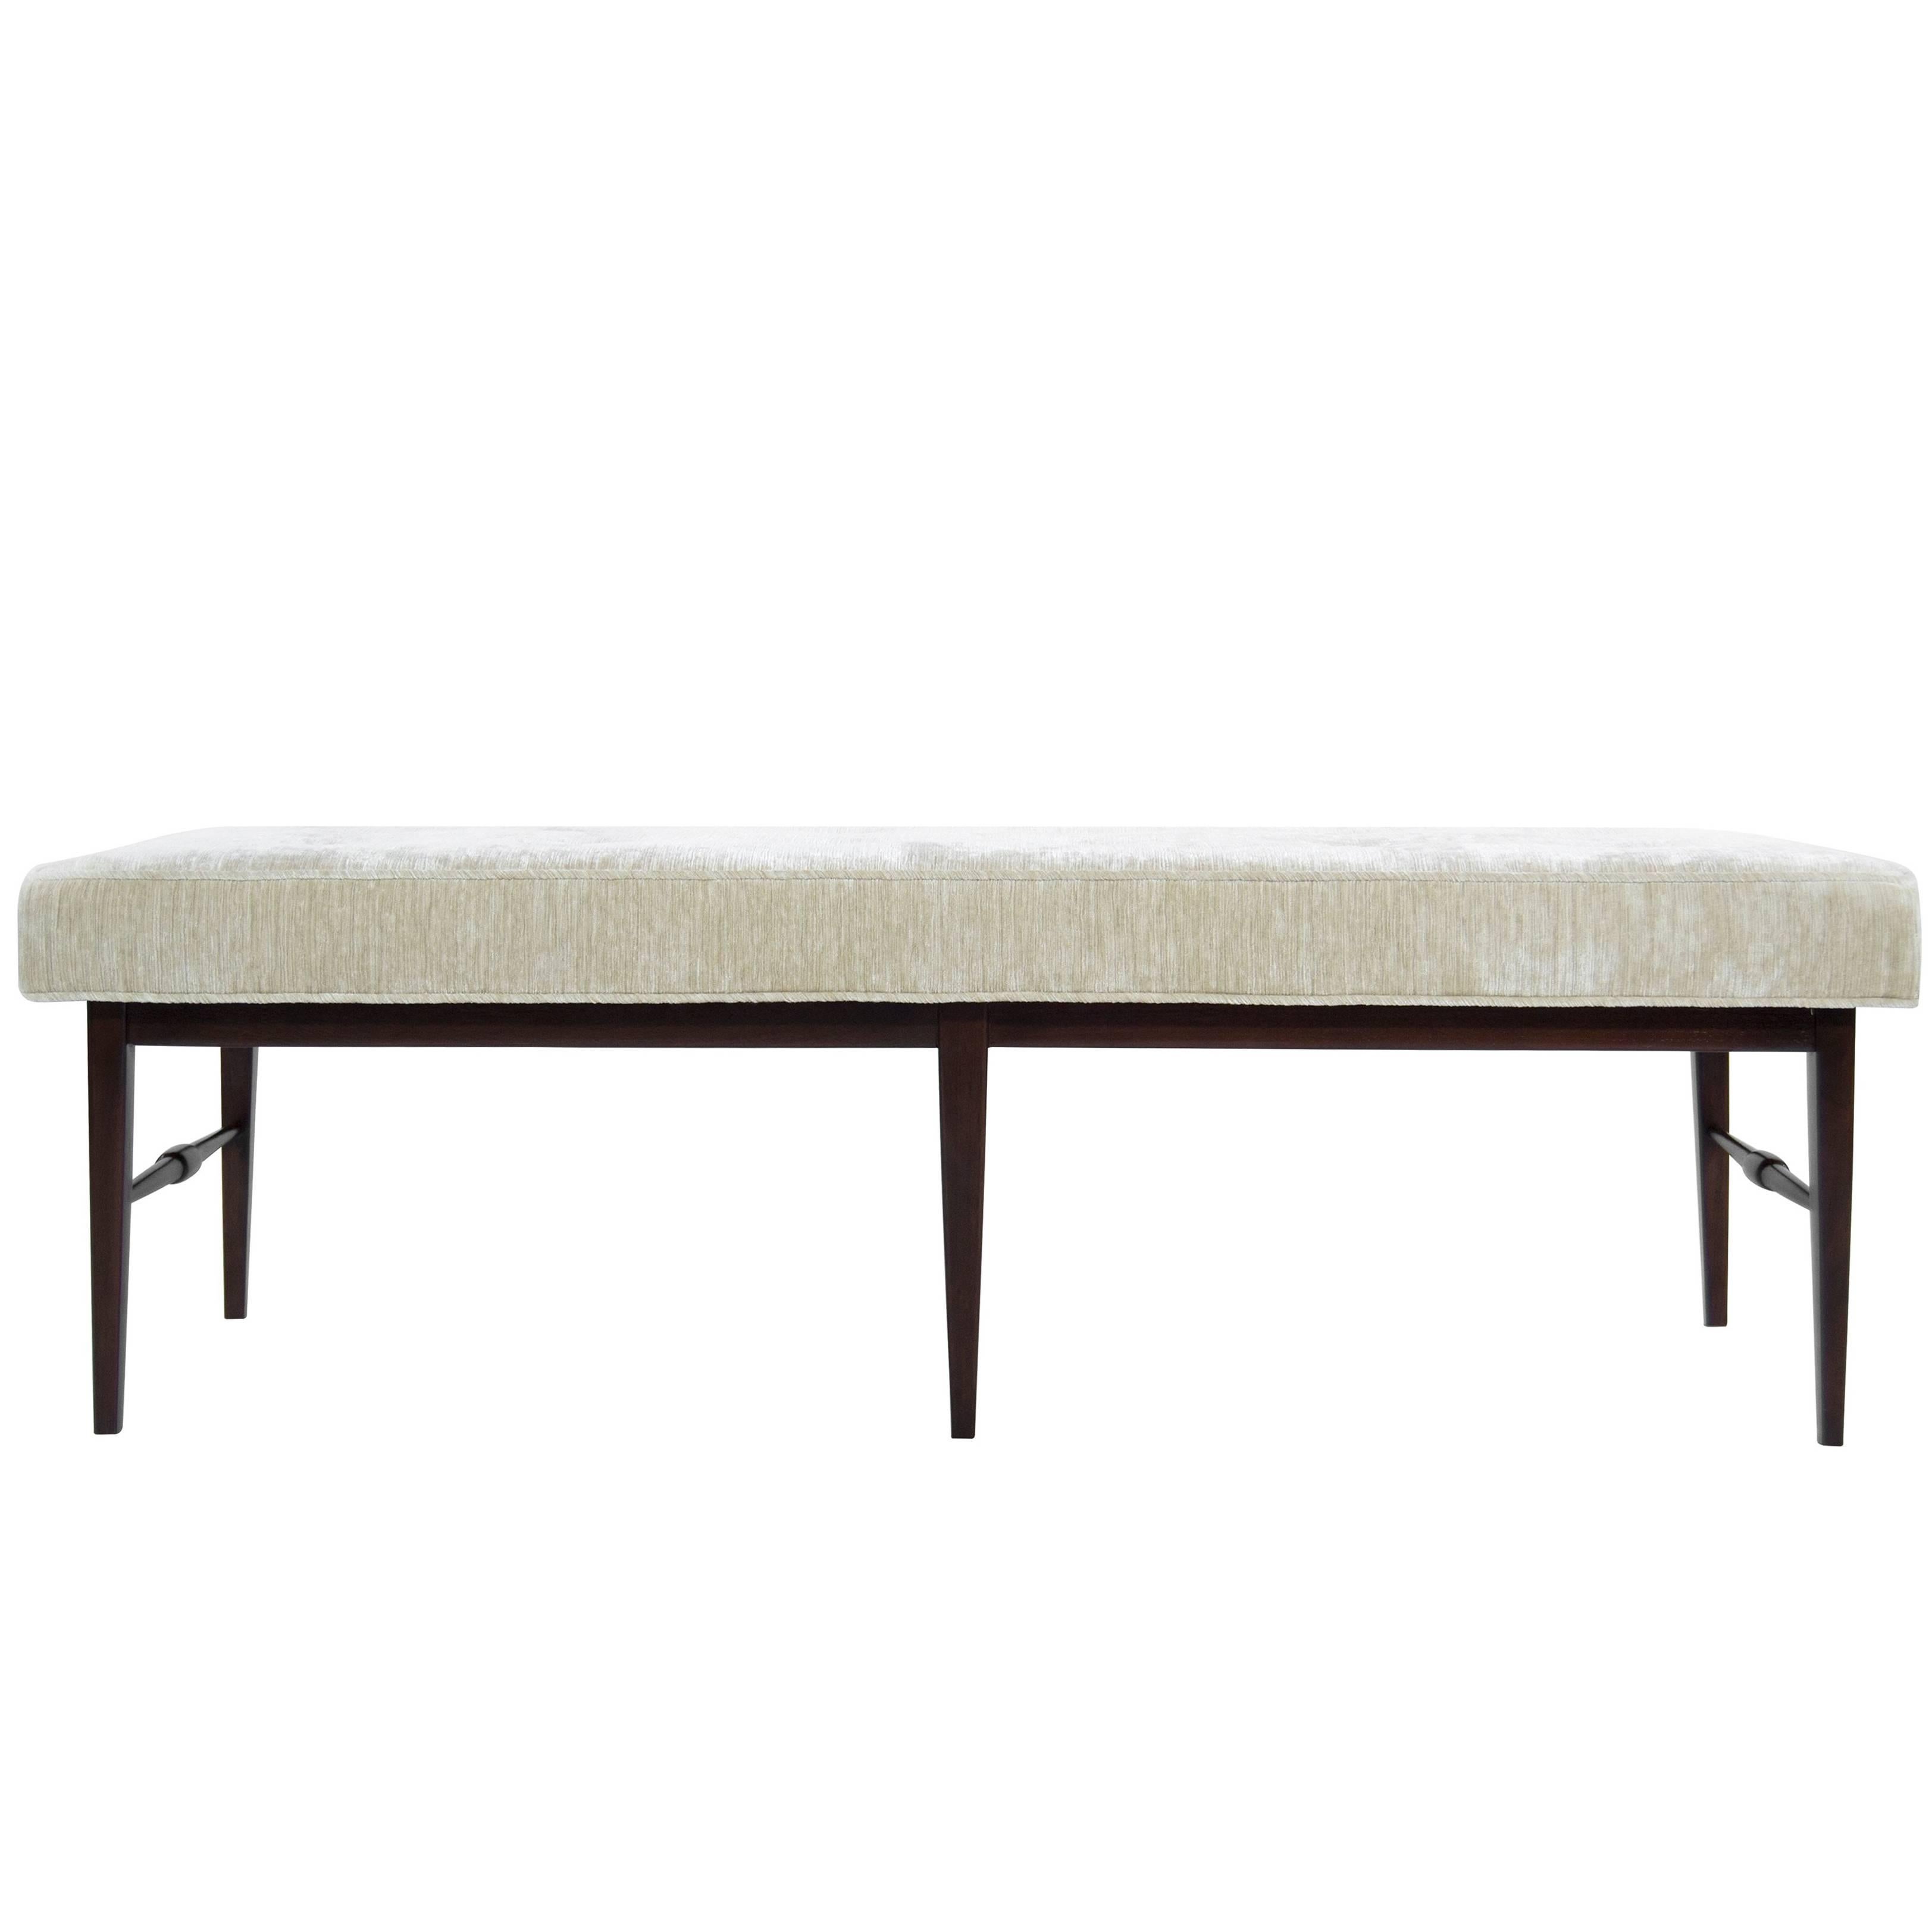 Paul McCobb Style Bench in Chenille